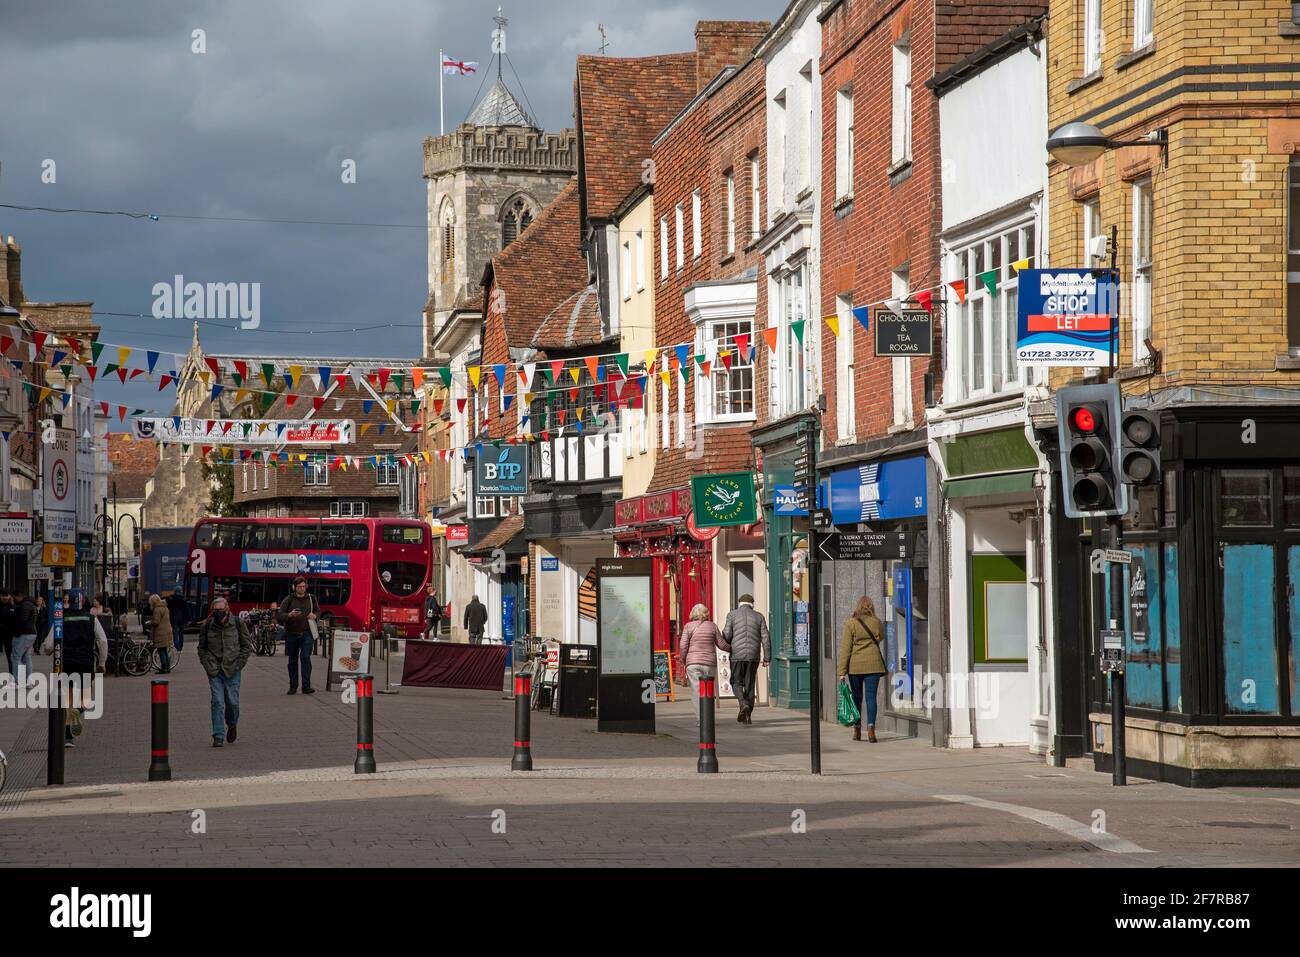 Salisbury, Wiltshire, England, UK. 2021.  Shopping area of Salisbury city centre during Civid lockdown in sunlight with a darkened stormy sky. Stock Photo